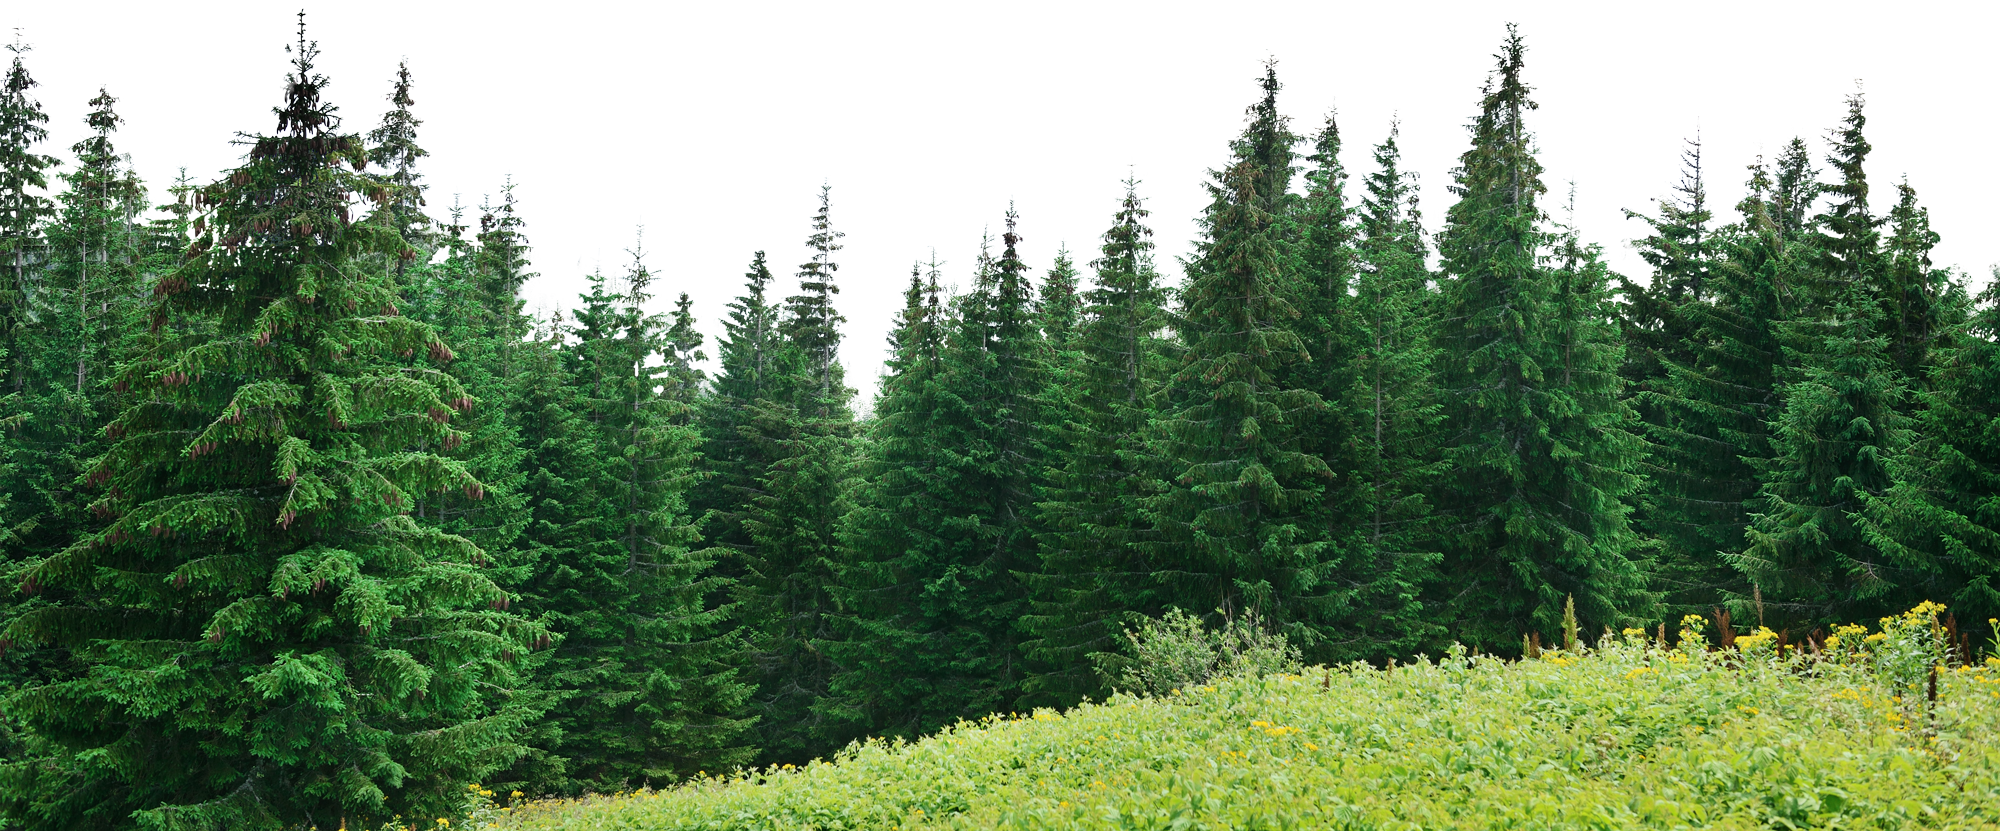 Forest PNG Image Free Download